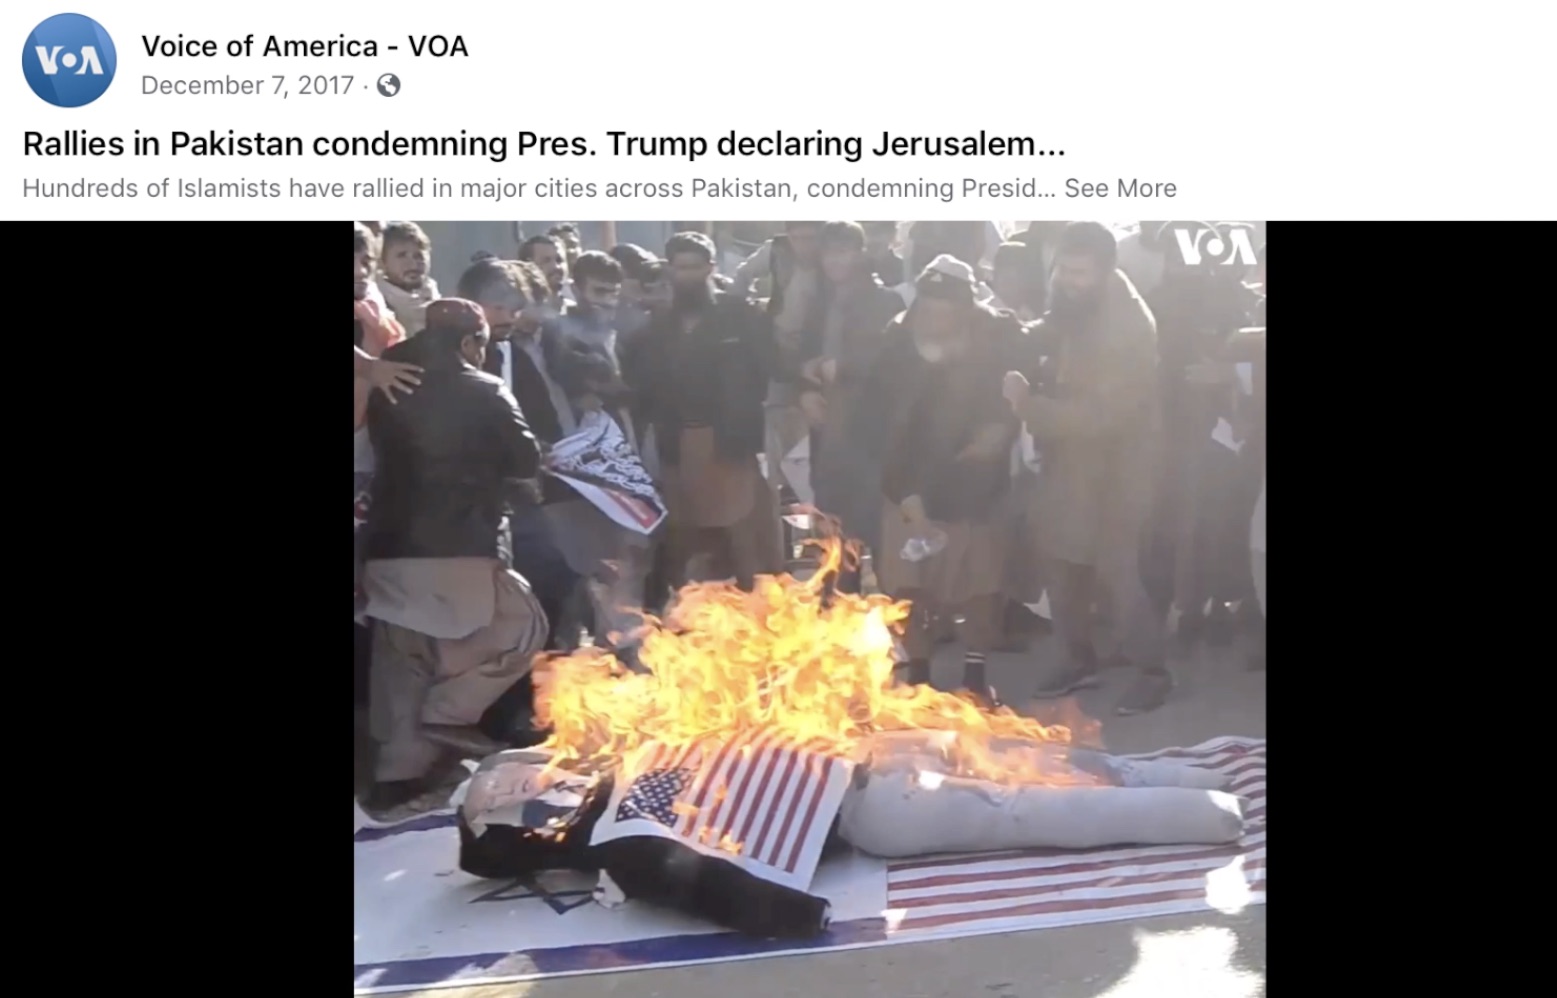 Voice of America (VOA) Facebook raw footage video showing the burning of U.S. and Israeli flags in December 2017 without context, balance, or commentary in the video.